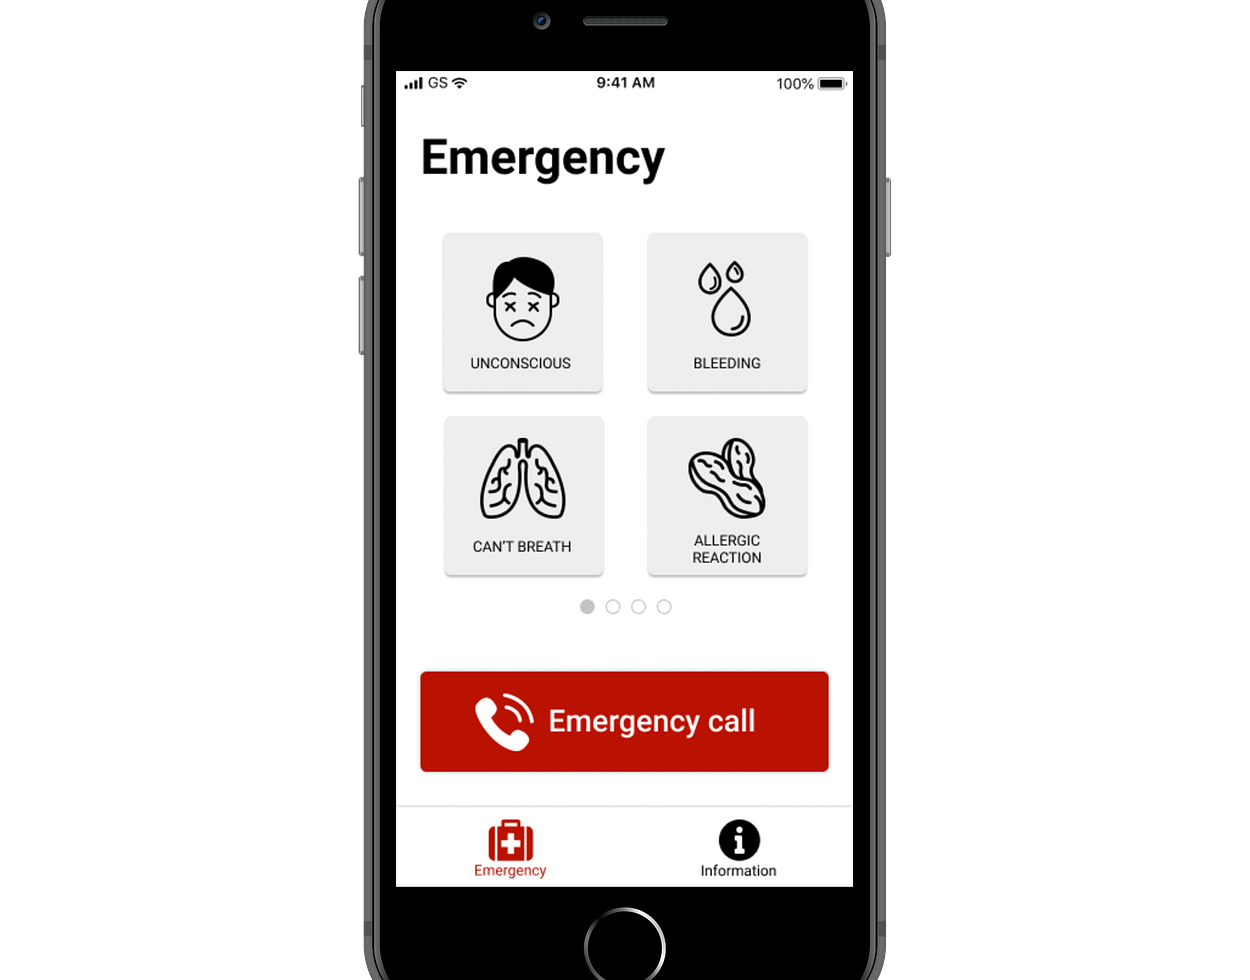 The user can choose a first aid category guide or also place an emergency call.